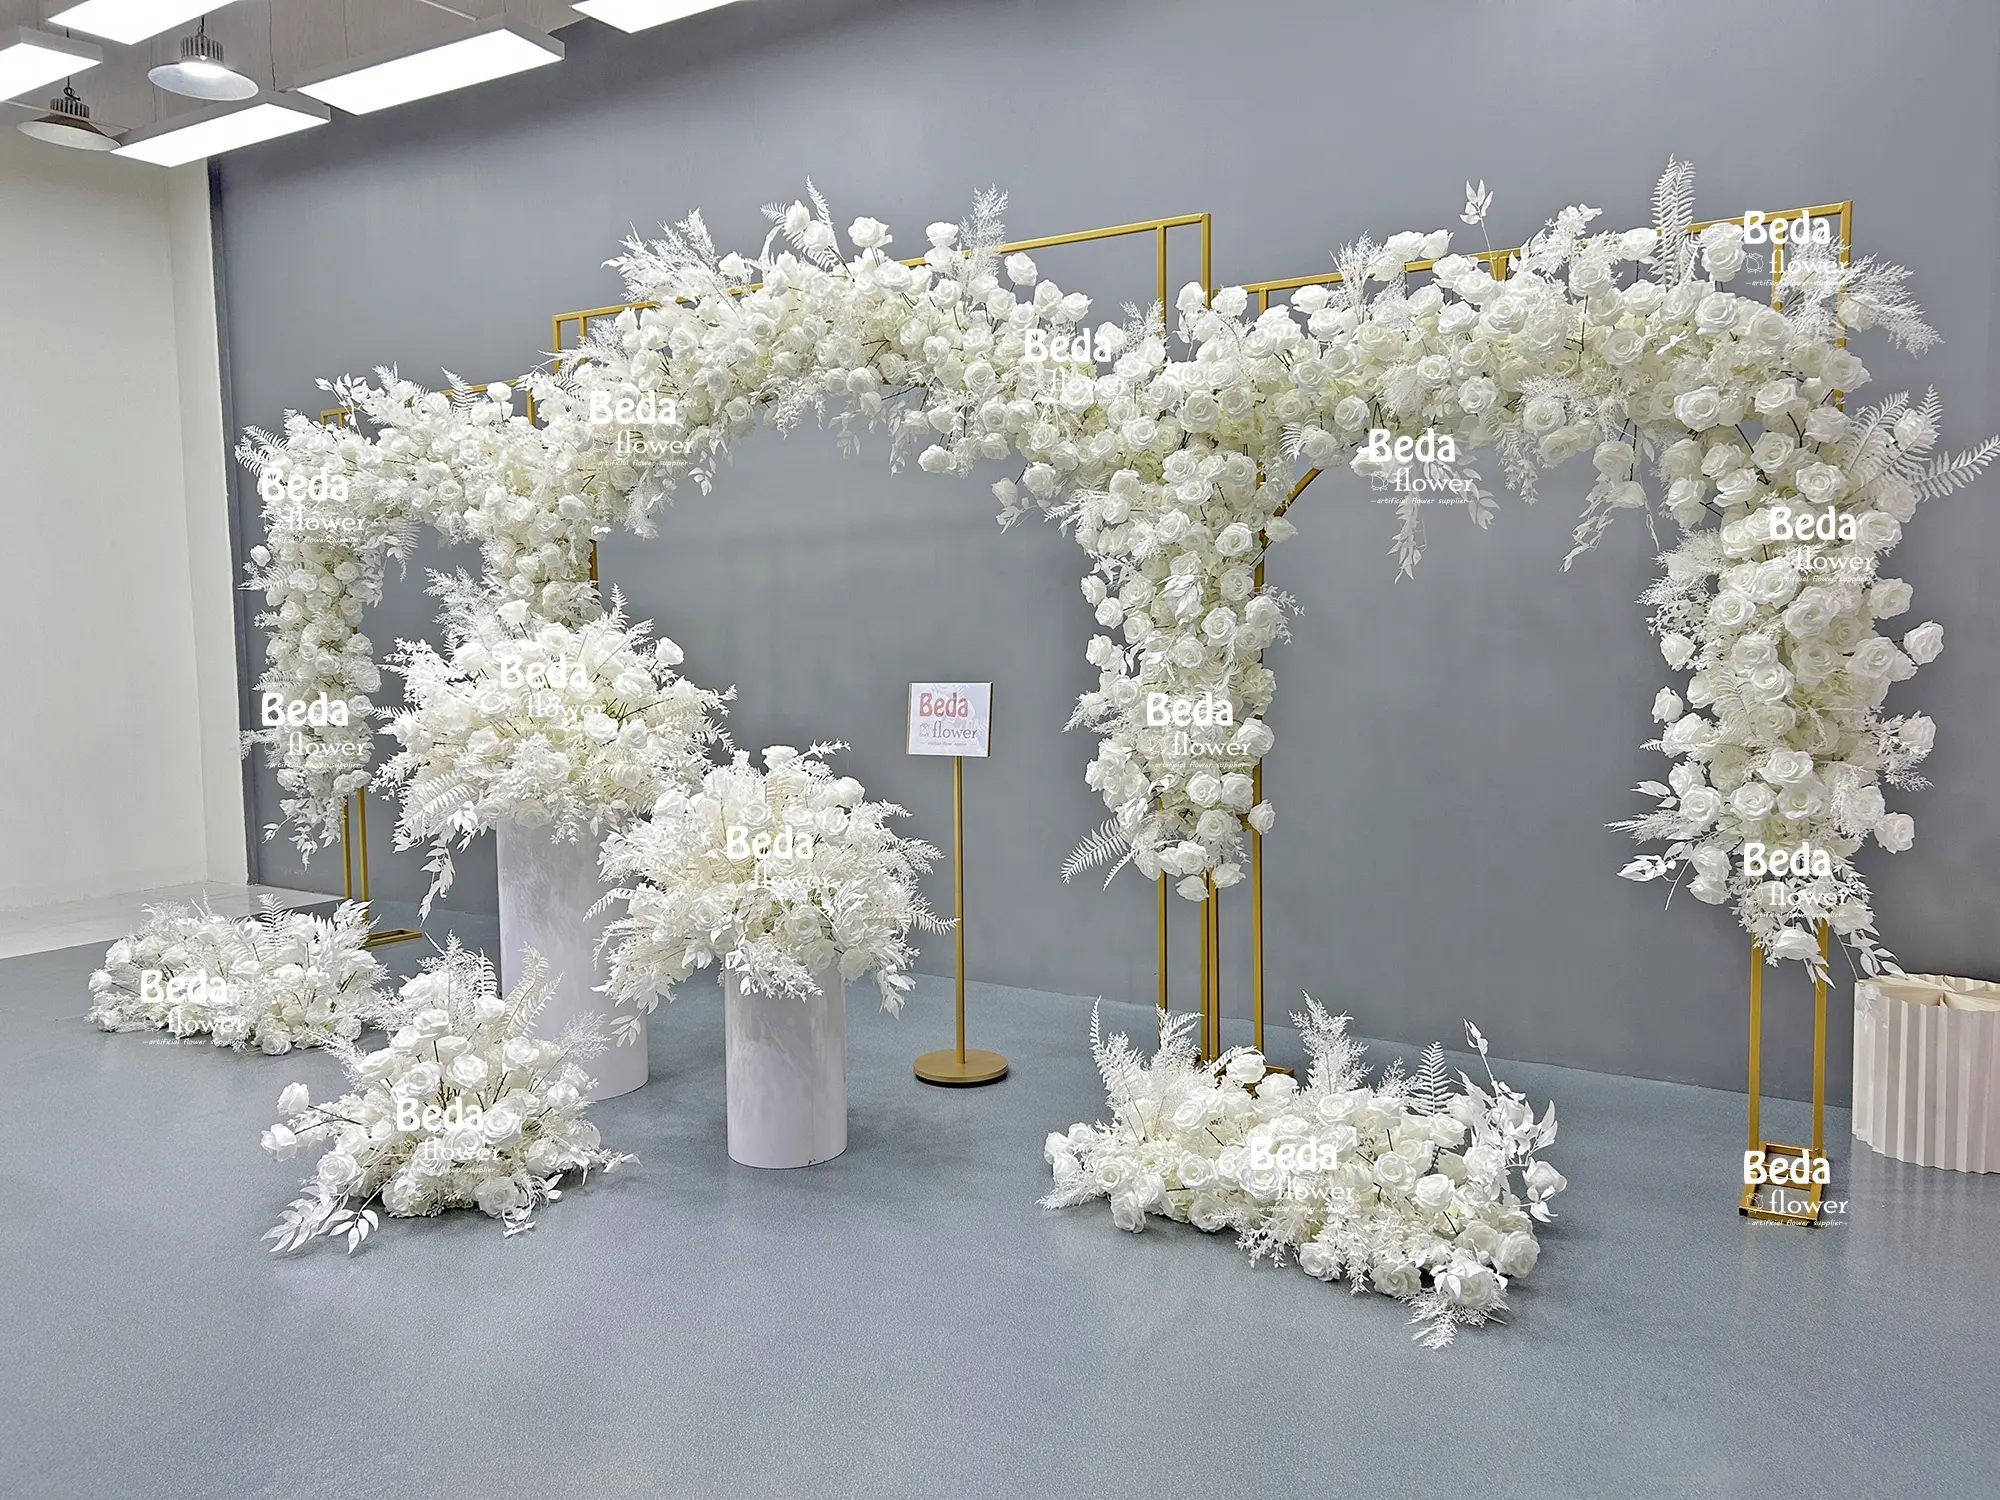 New Product High Quality Romantic Wholesale Artificial Wedding Decoration Gate for Home Decor Wedding